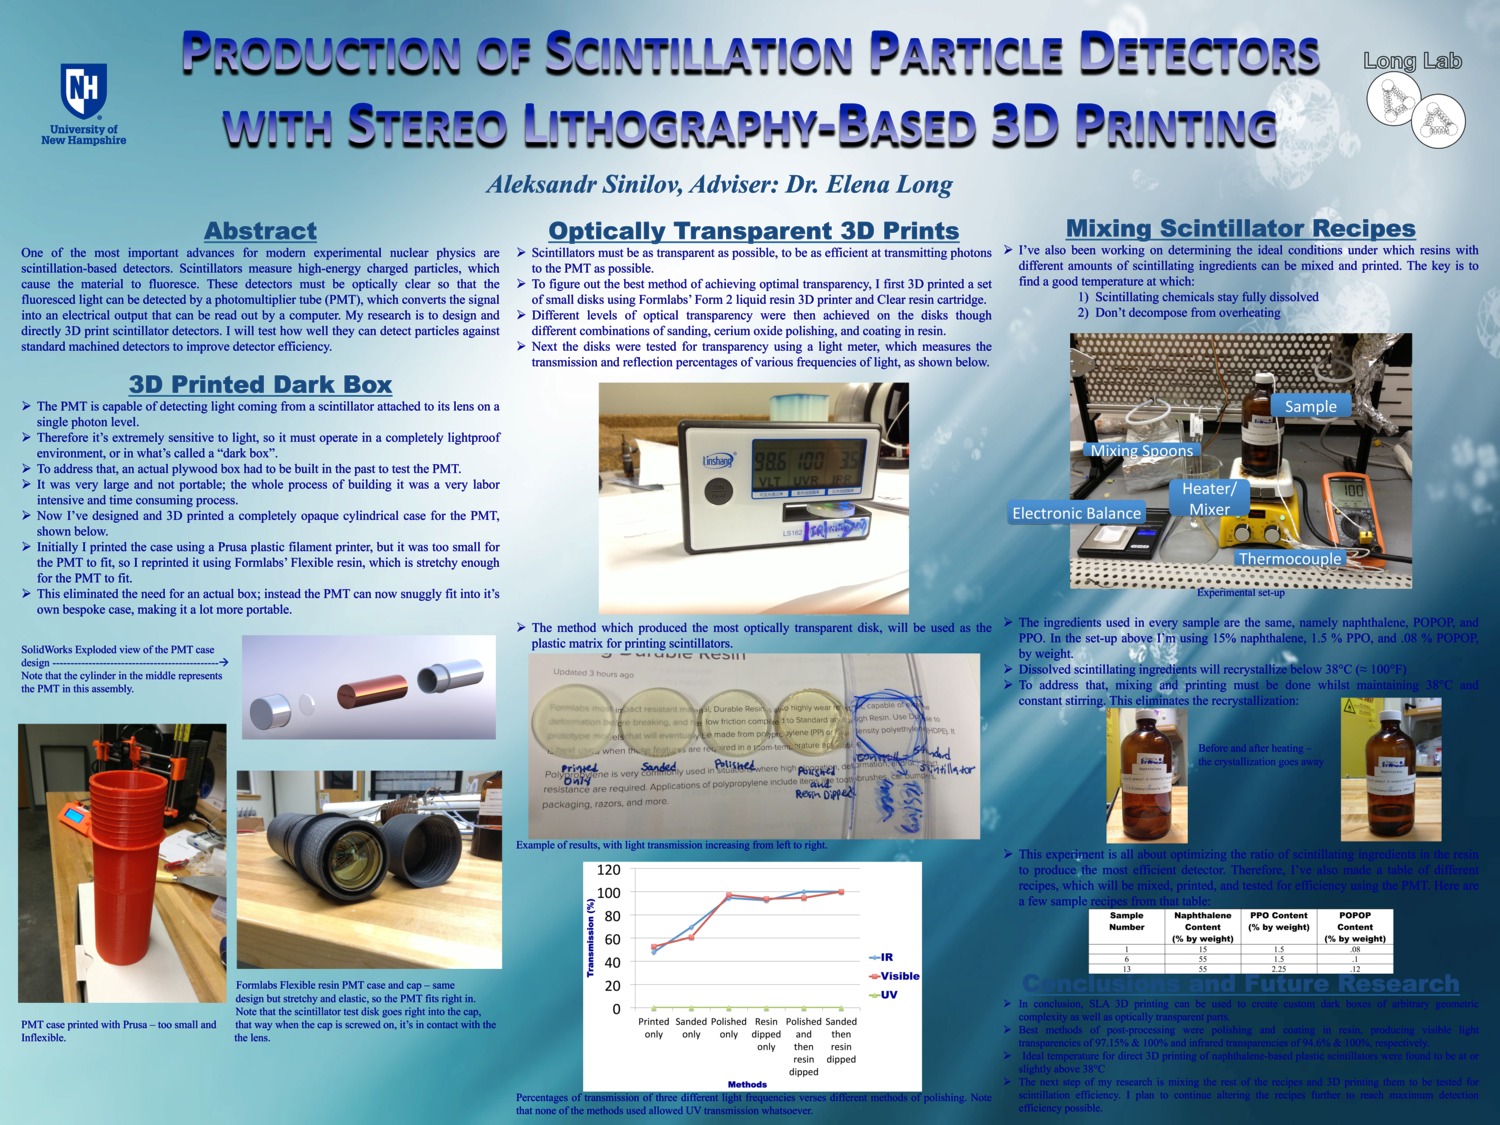 Production Of Scintillation Particle Detectors With Stereo Lithography-Based 3d Printing by as5